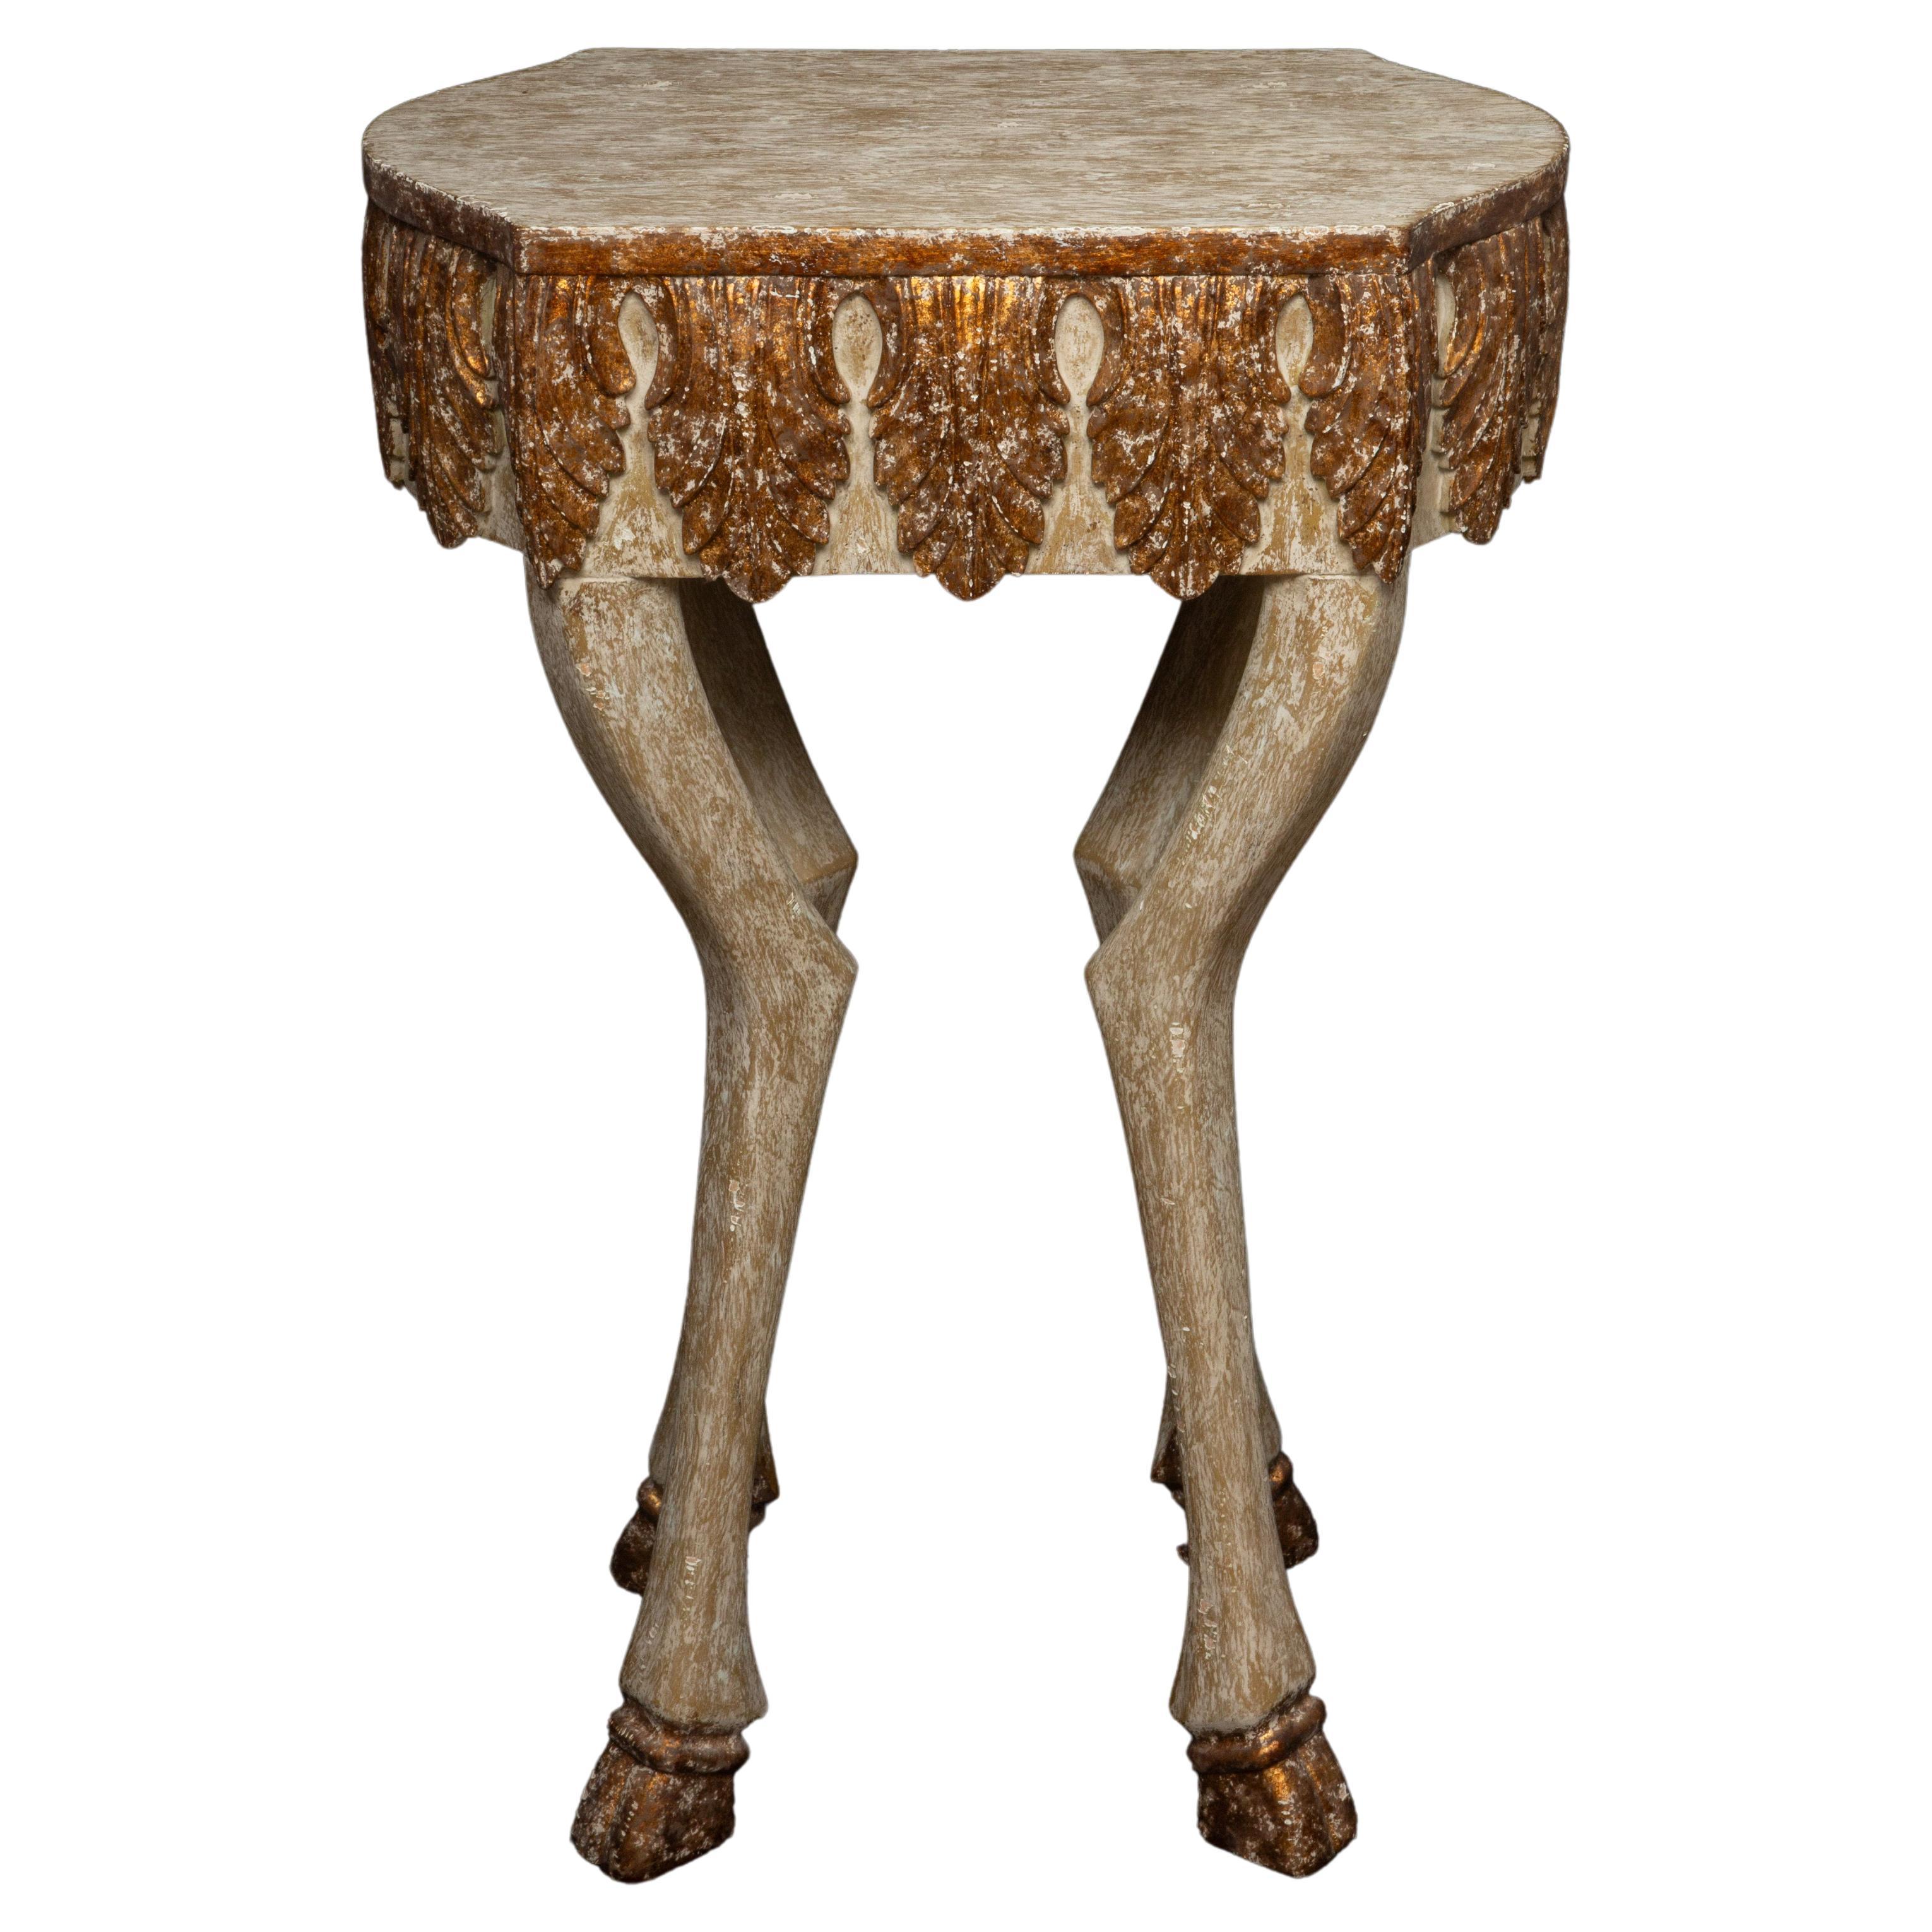 Gilded Hoof "Hoofy" Leg Side/End Table by Creel and Gow